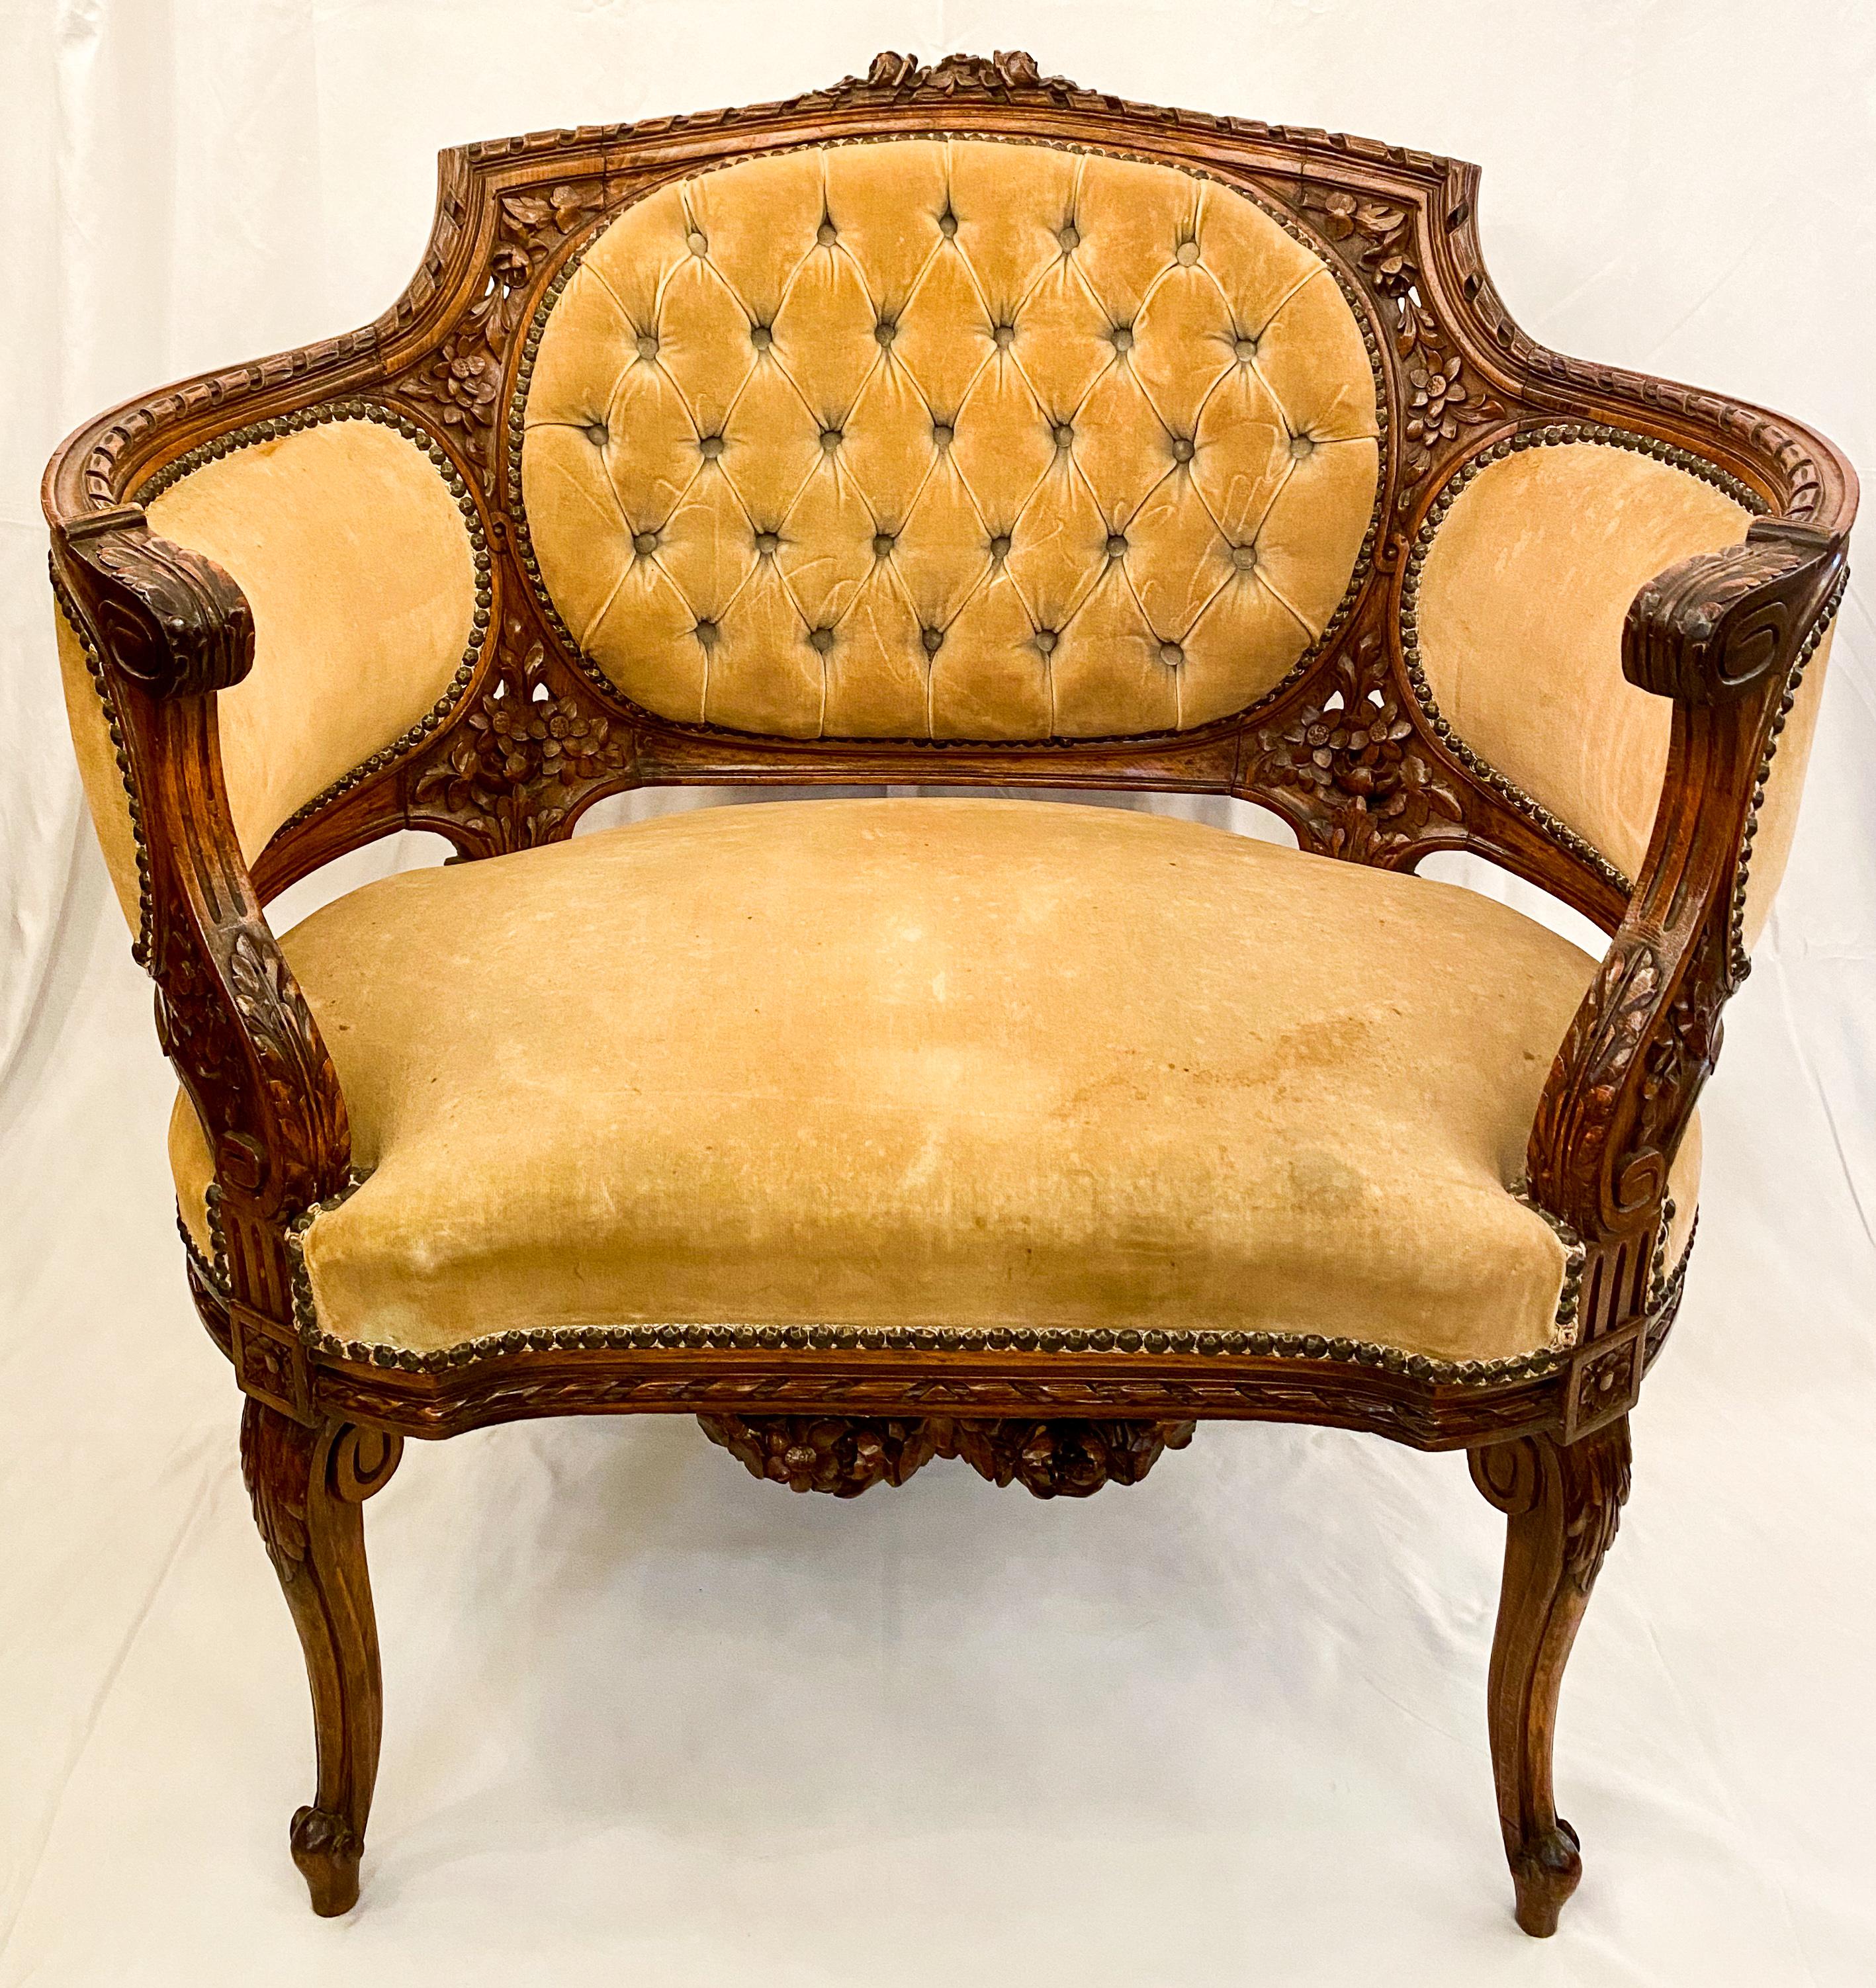 Antique French carved walnut bergère chair circa 1870s with original beautiful yellow ochre velvet upholstery. One tear in upholstery is visible on the back of the chair as shown in the photos. A beautiful, sturdy, hand carved chair in very good